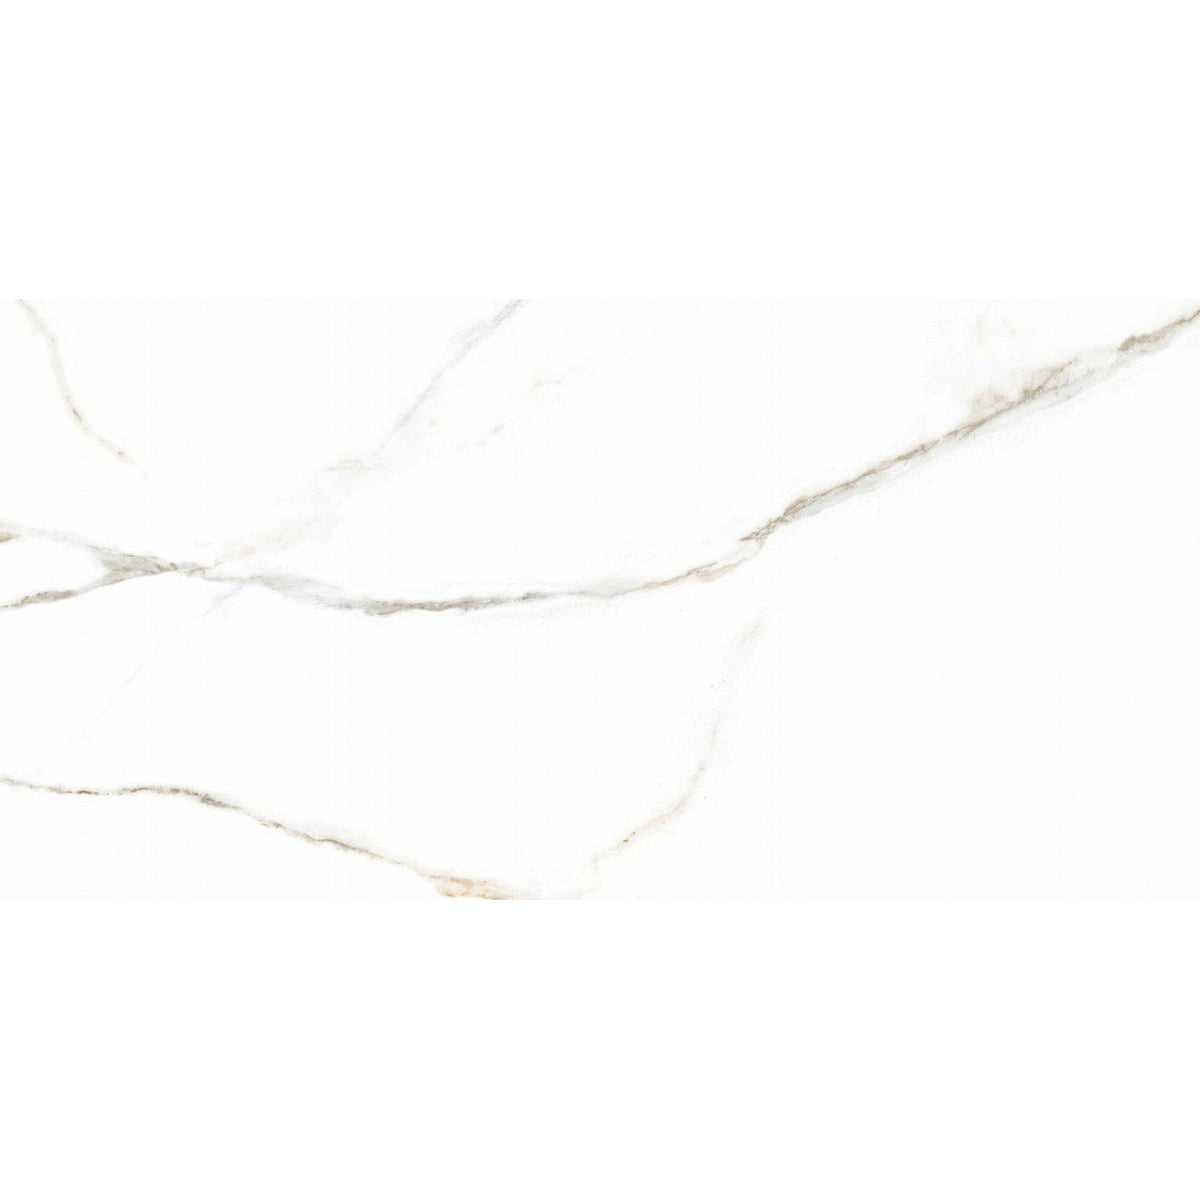 General Ceramic - Lance Series 12 in. x 24 in. Polished Rectified Porcelain Tile - White